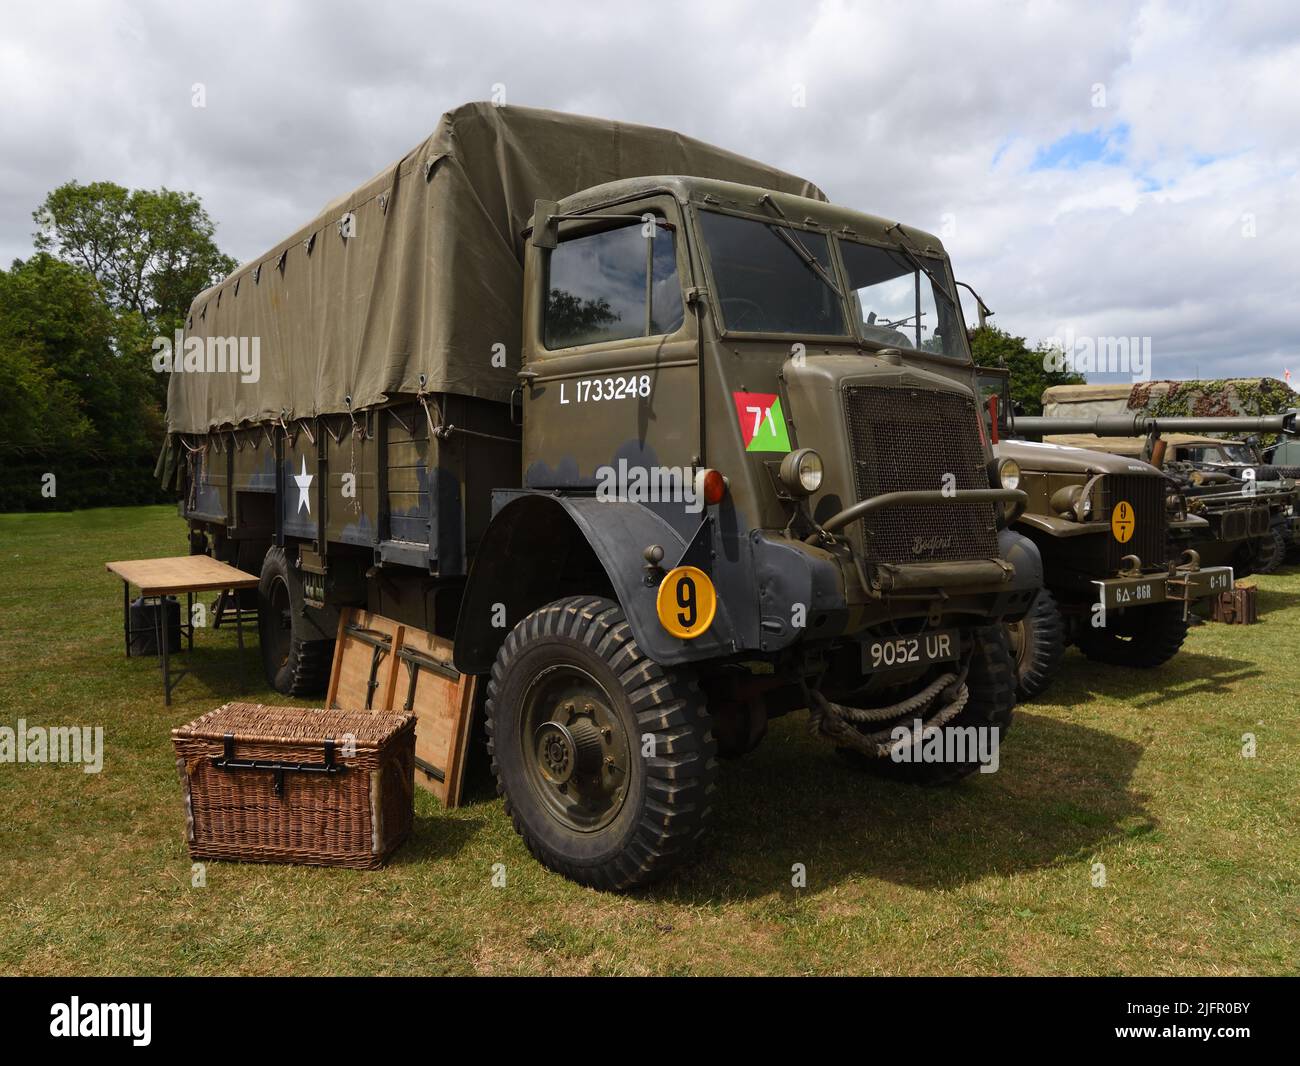 Vintage Military Bedford Truck parked ongrass. Stock Photo